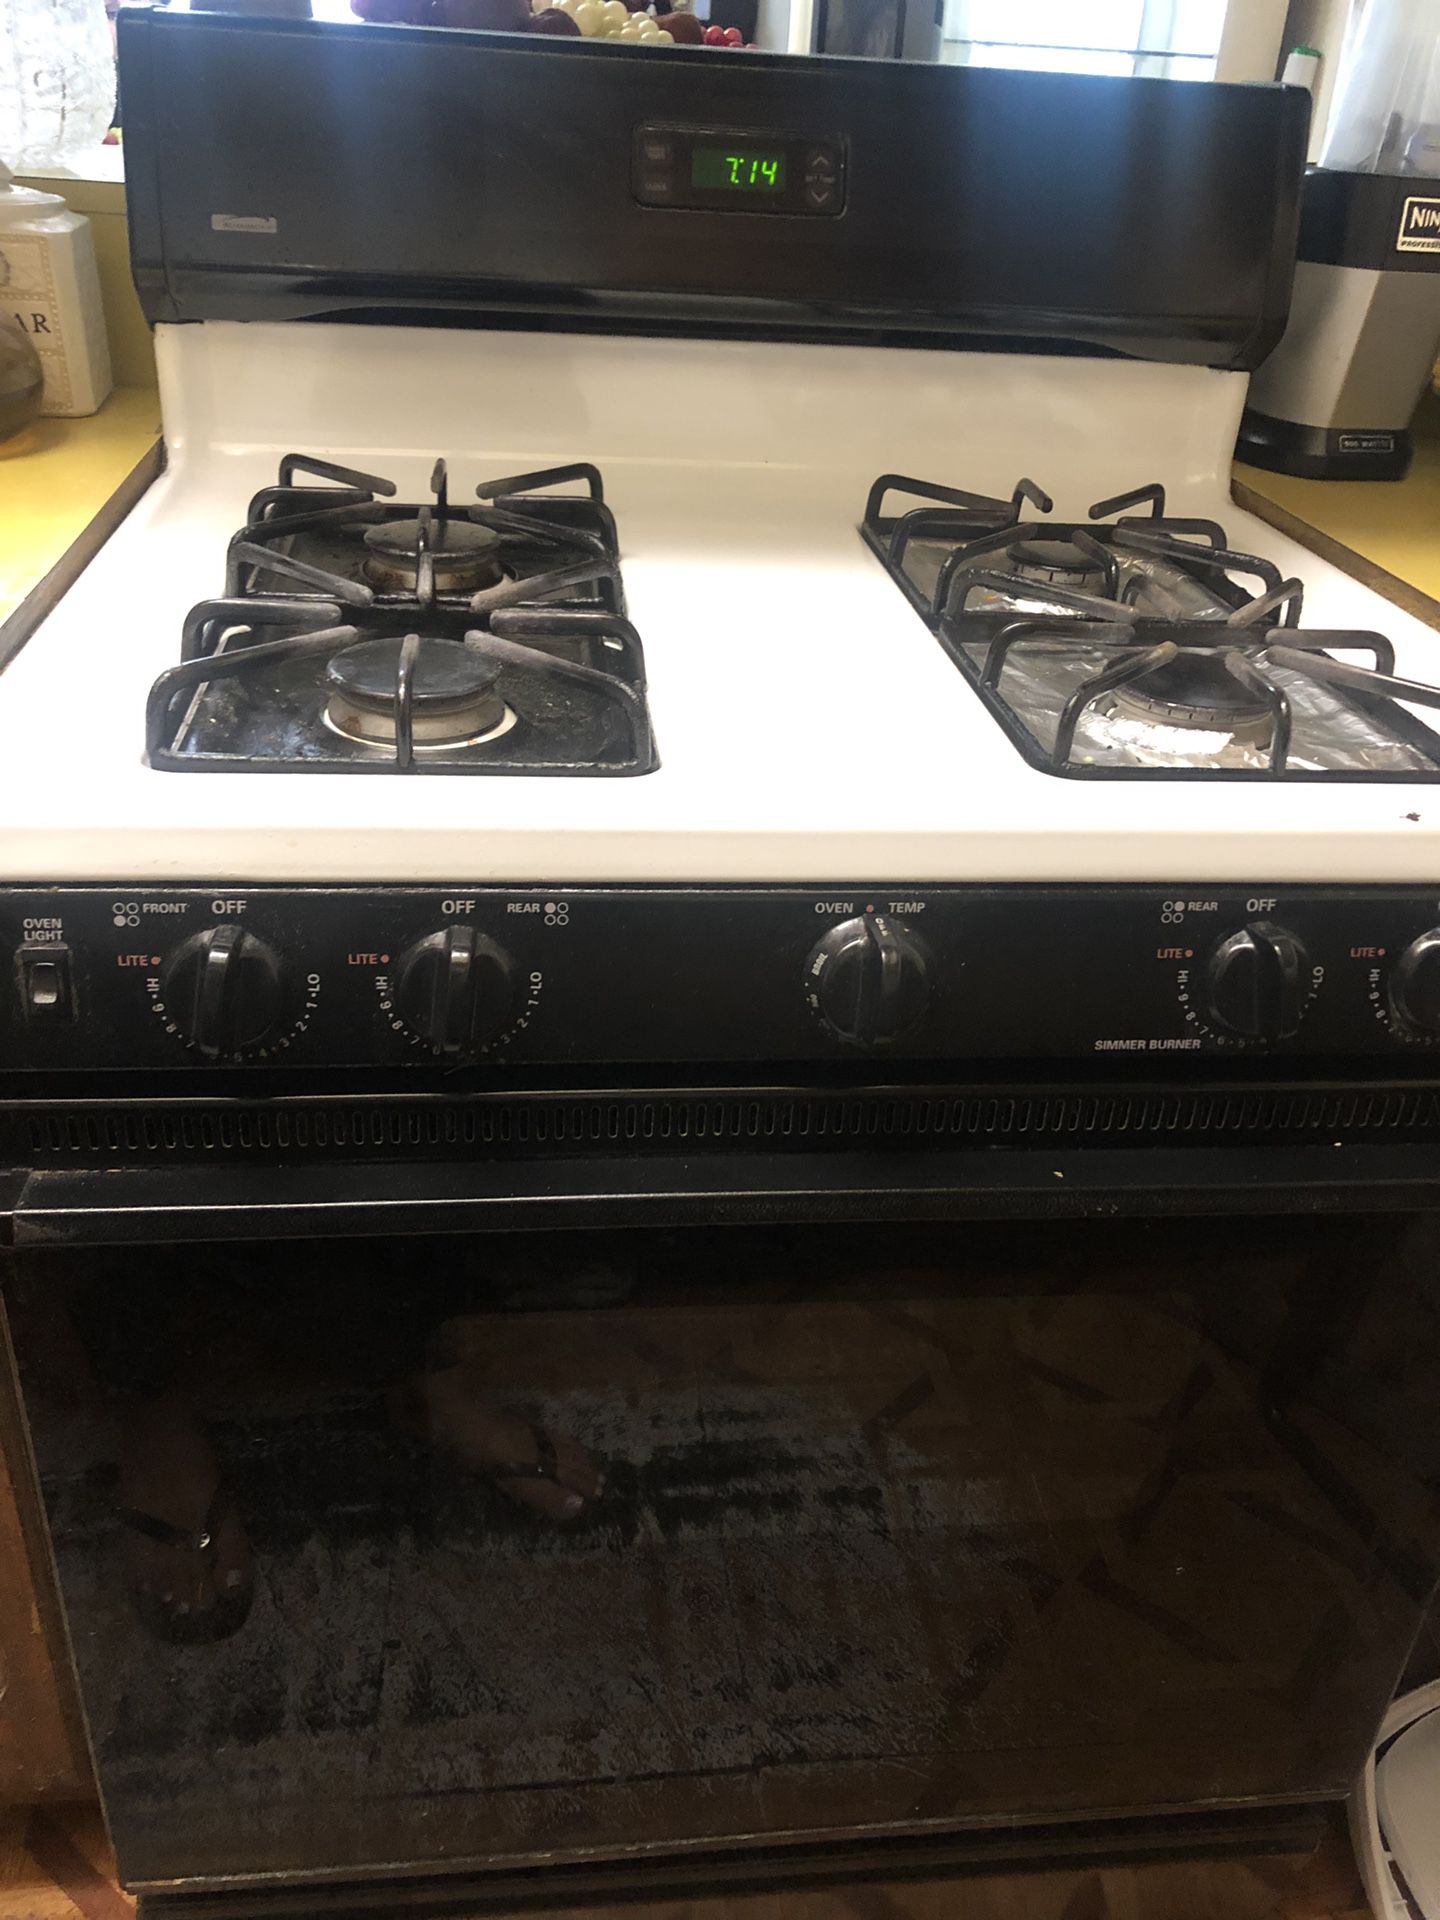 Kenmore gas range. Perfect condition